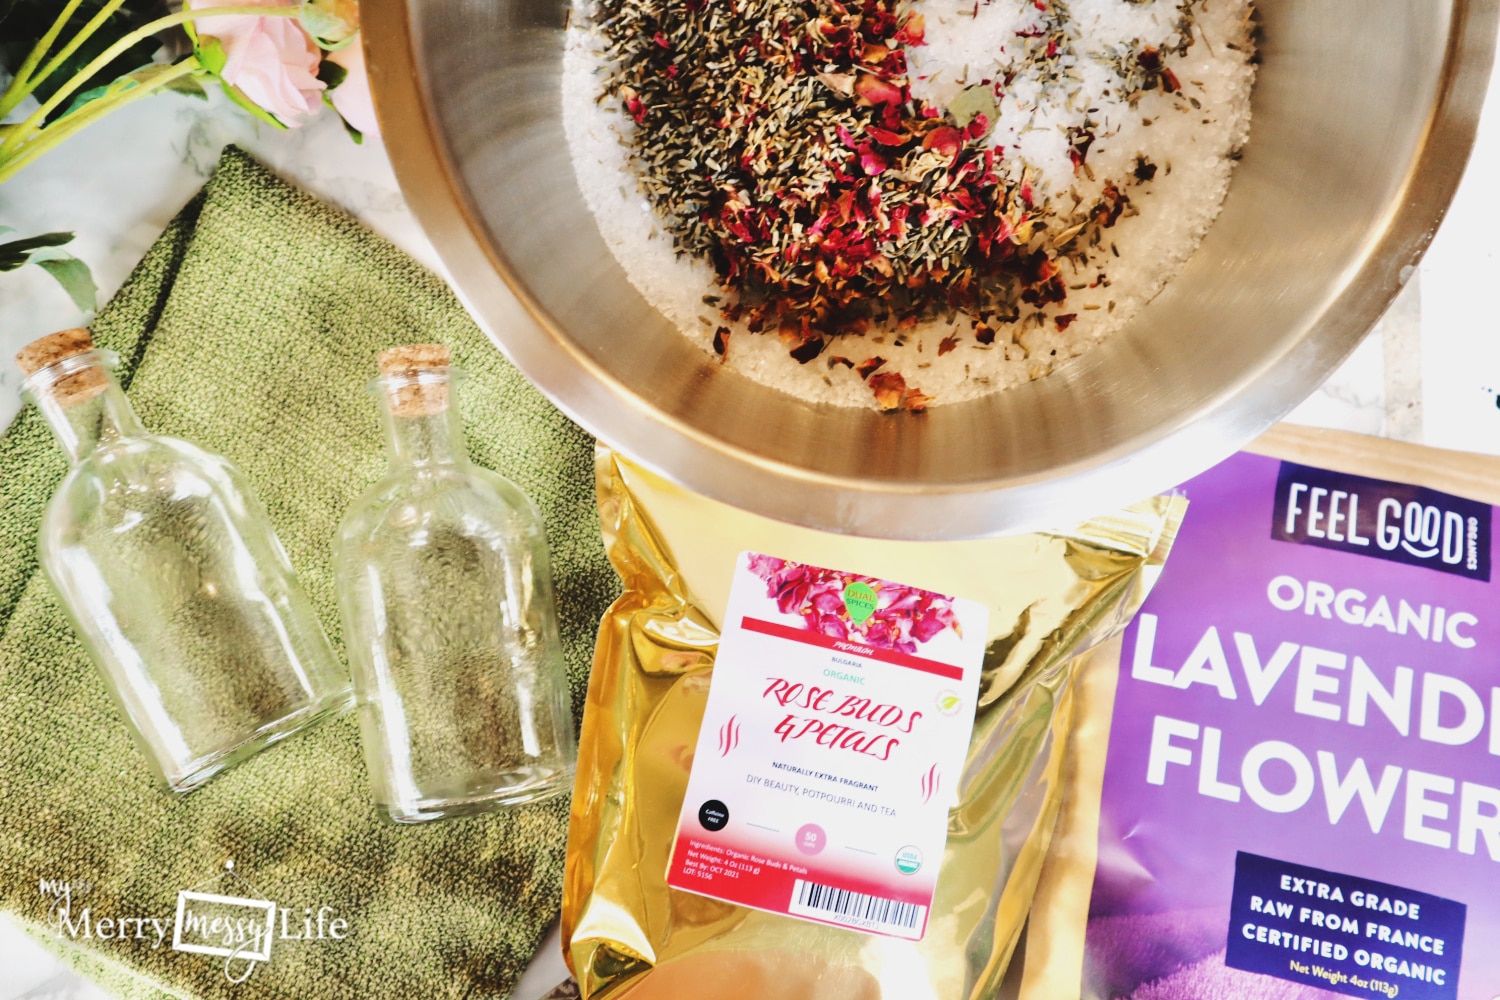 homemade bath salts with flower petals picture of the ingredients